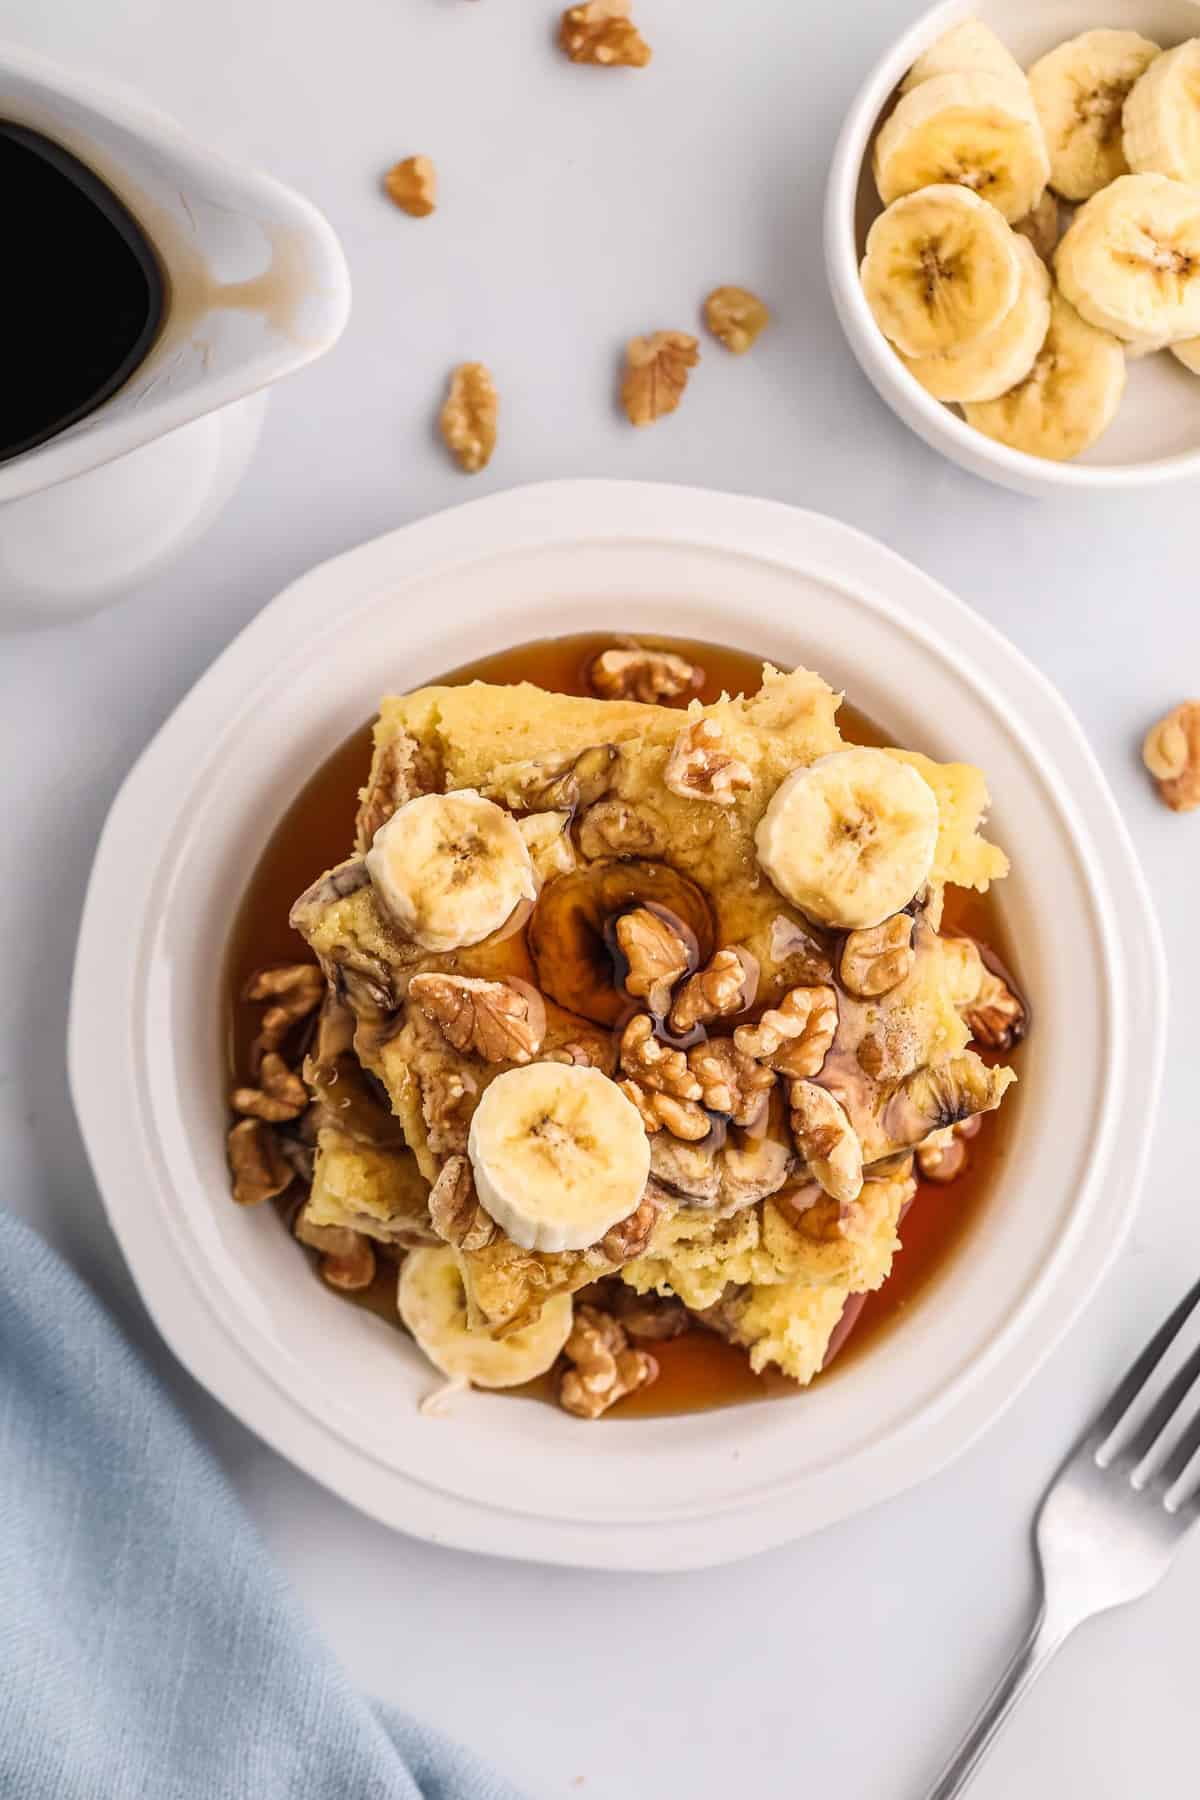 Overhead view of square pancakes topped with bananas and walnuts.